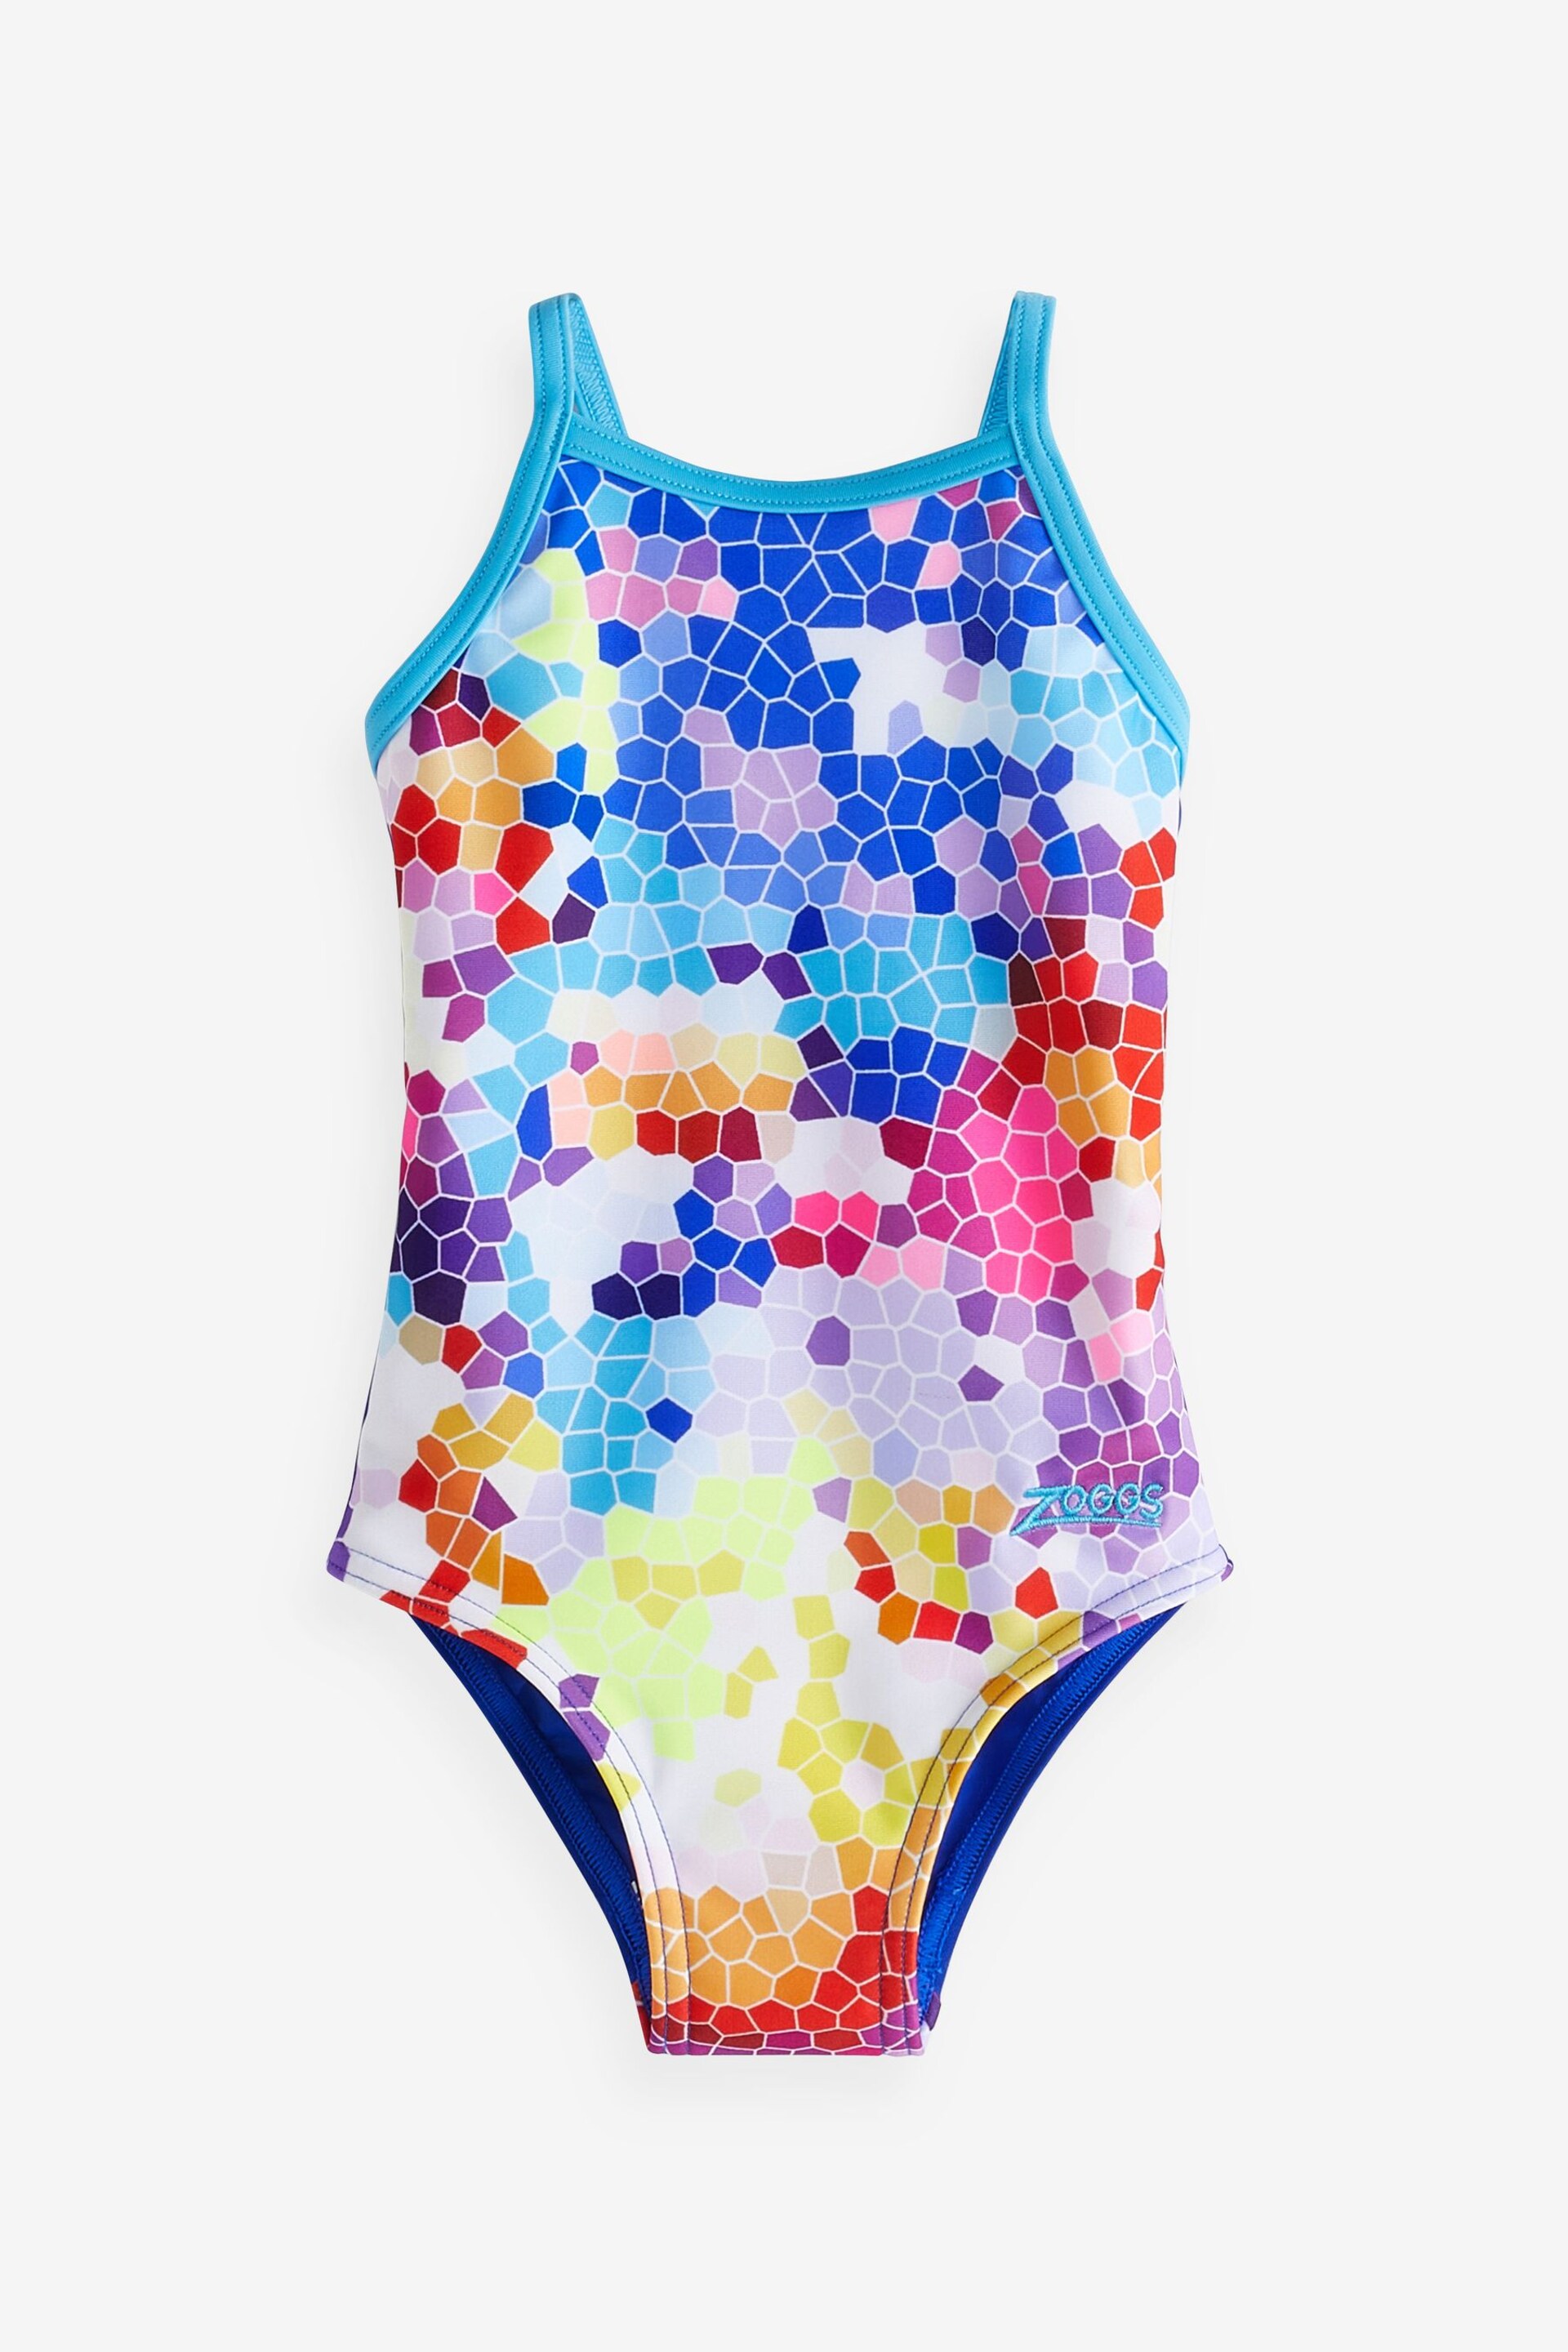 Zoggs Girls Yaroomba Floral One Piece Swimsuit - Image 1 of 5